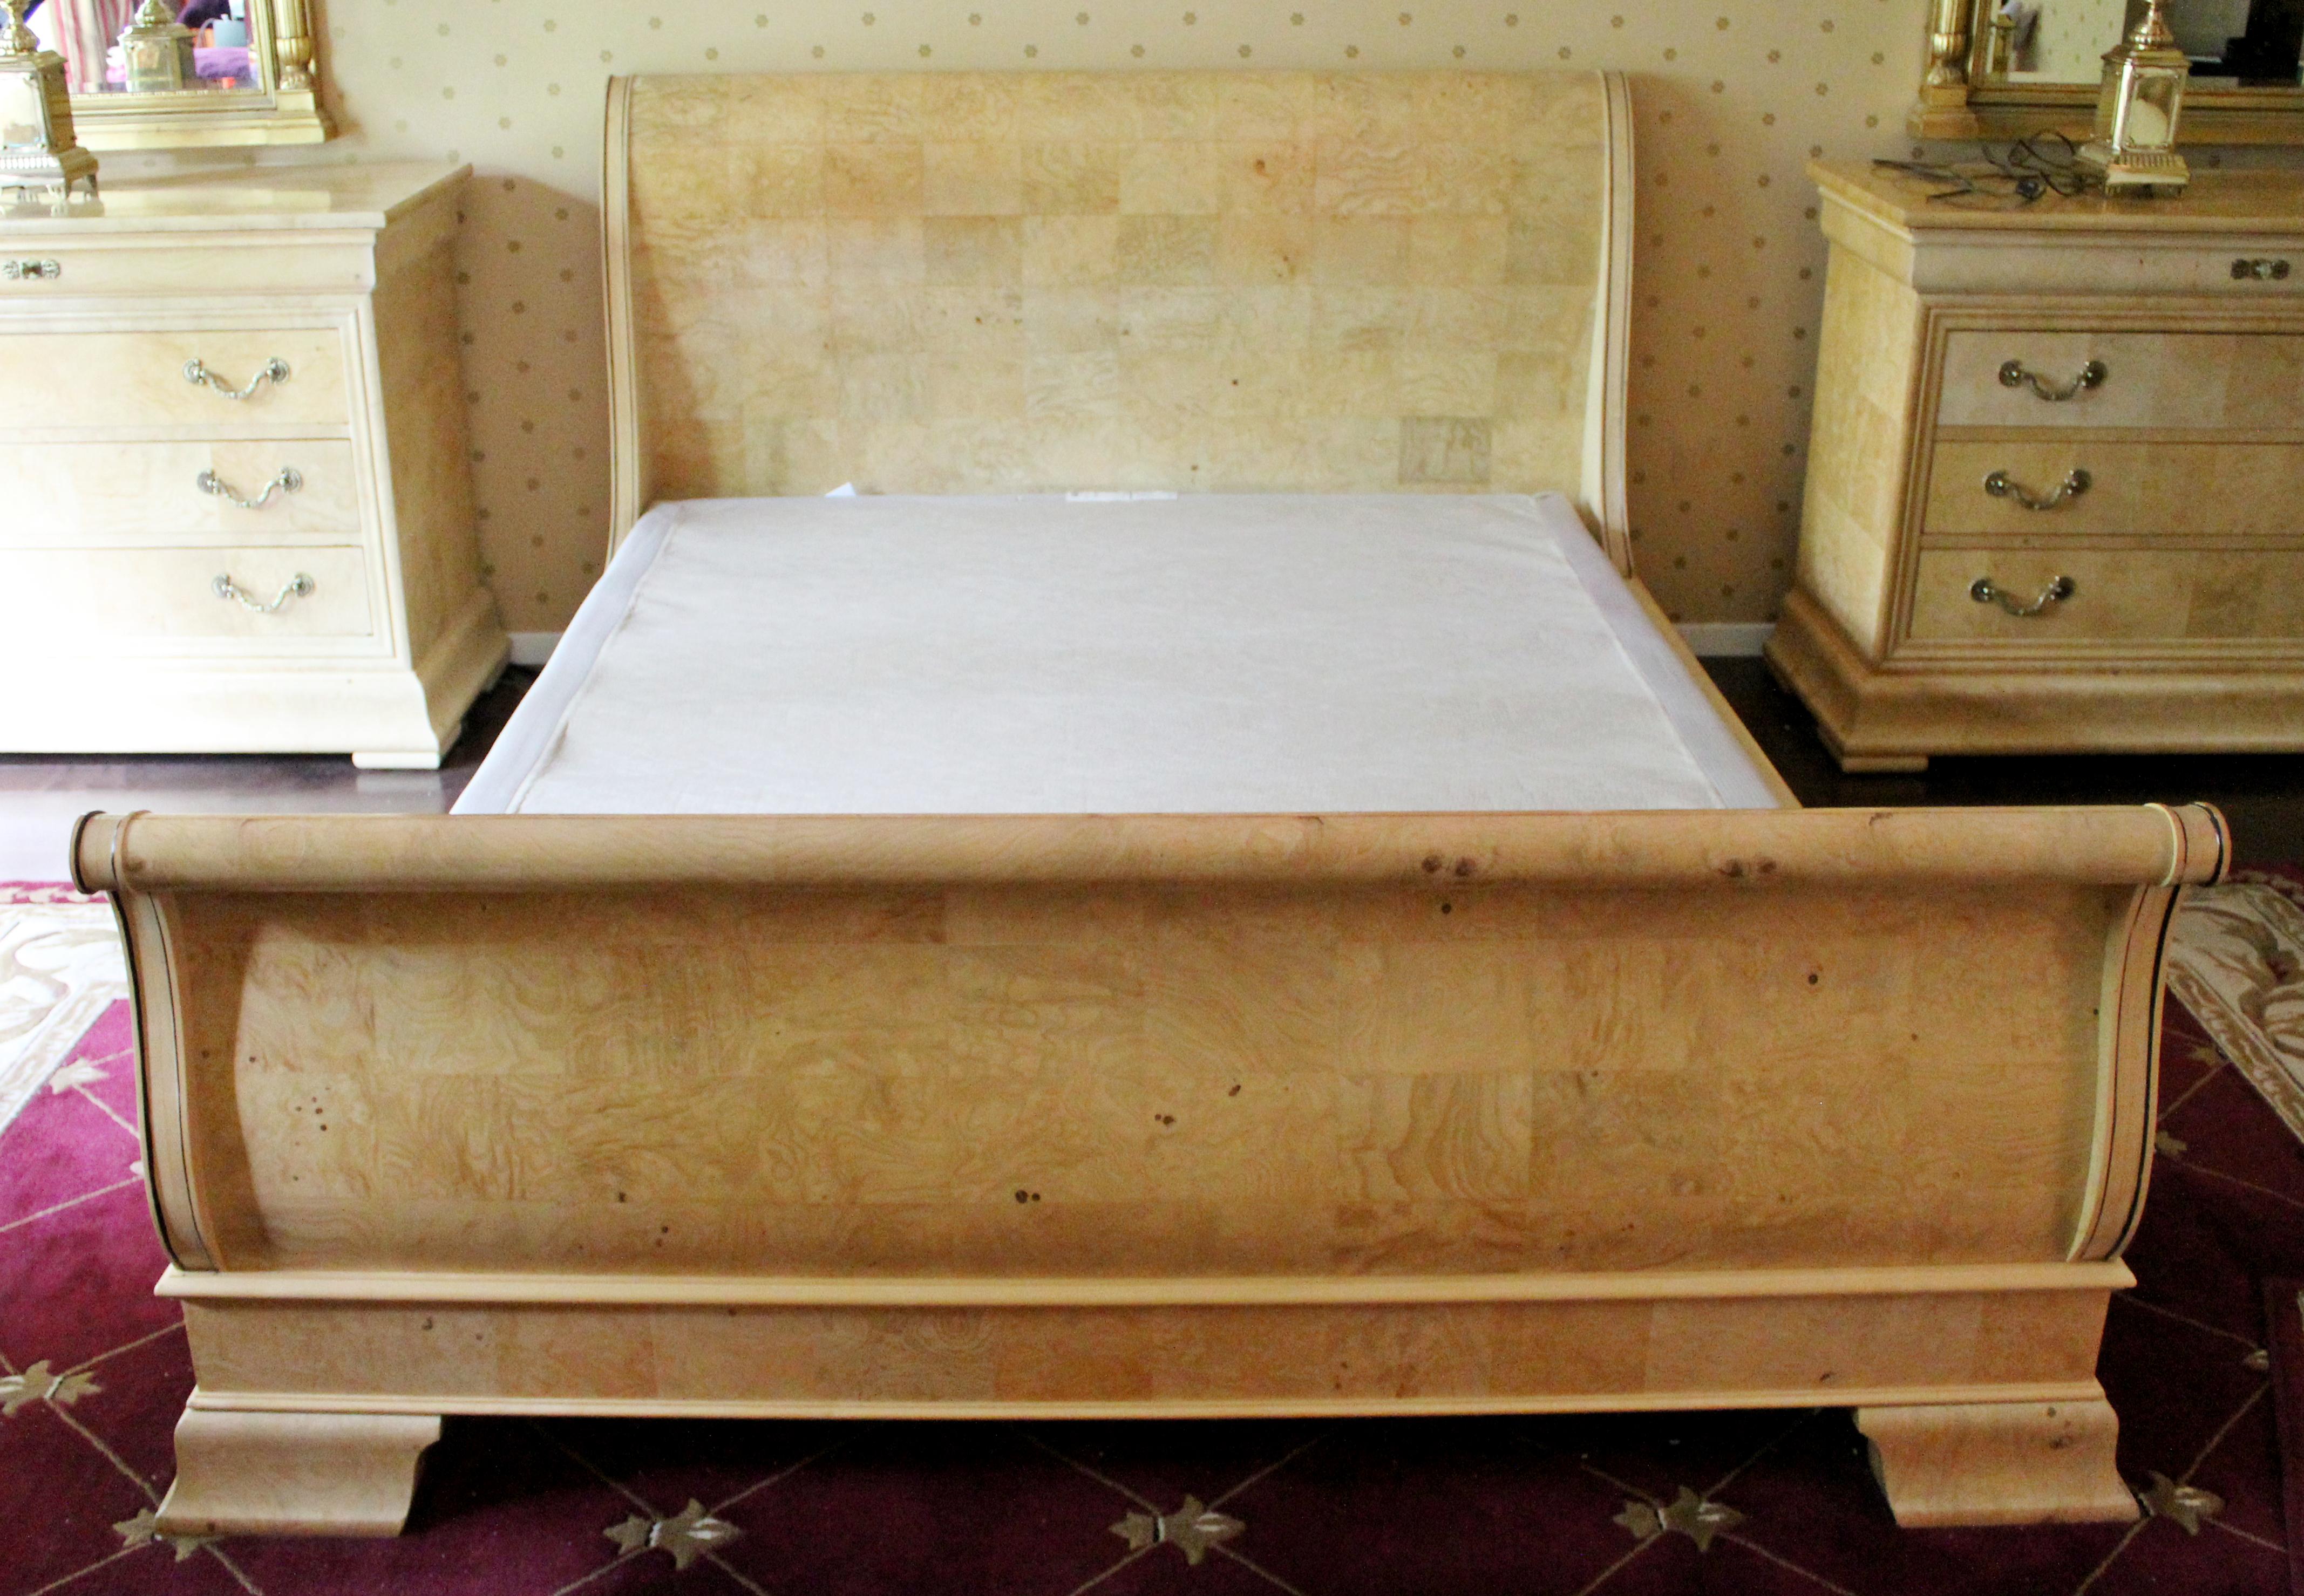 For your consideration is a magnificent sleigh bed frame, made of light burl wood, by Henredon the Charles X collection. In very good condition. The dimensions are 64.5